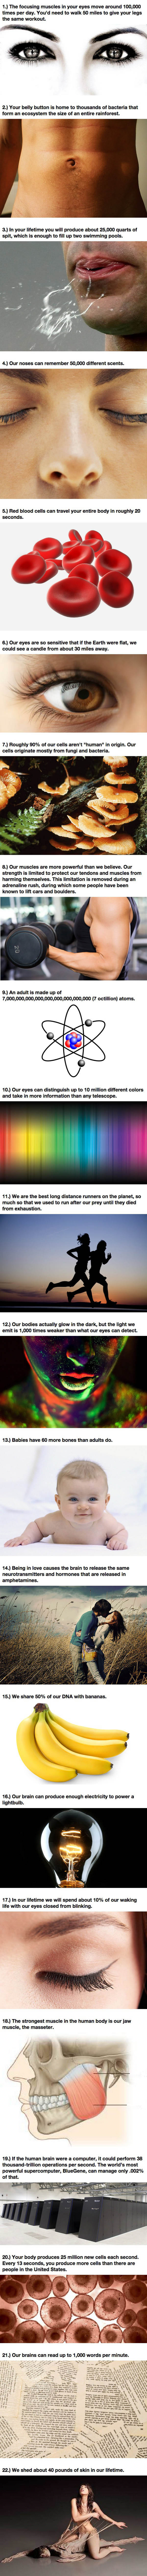 22 wild facts about the human body you probably never thought about